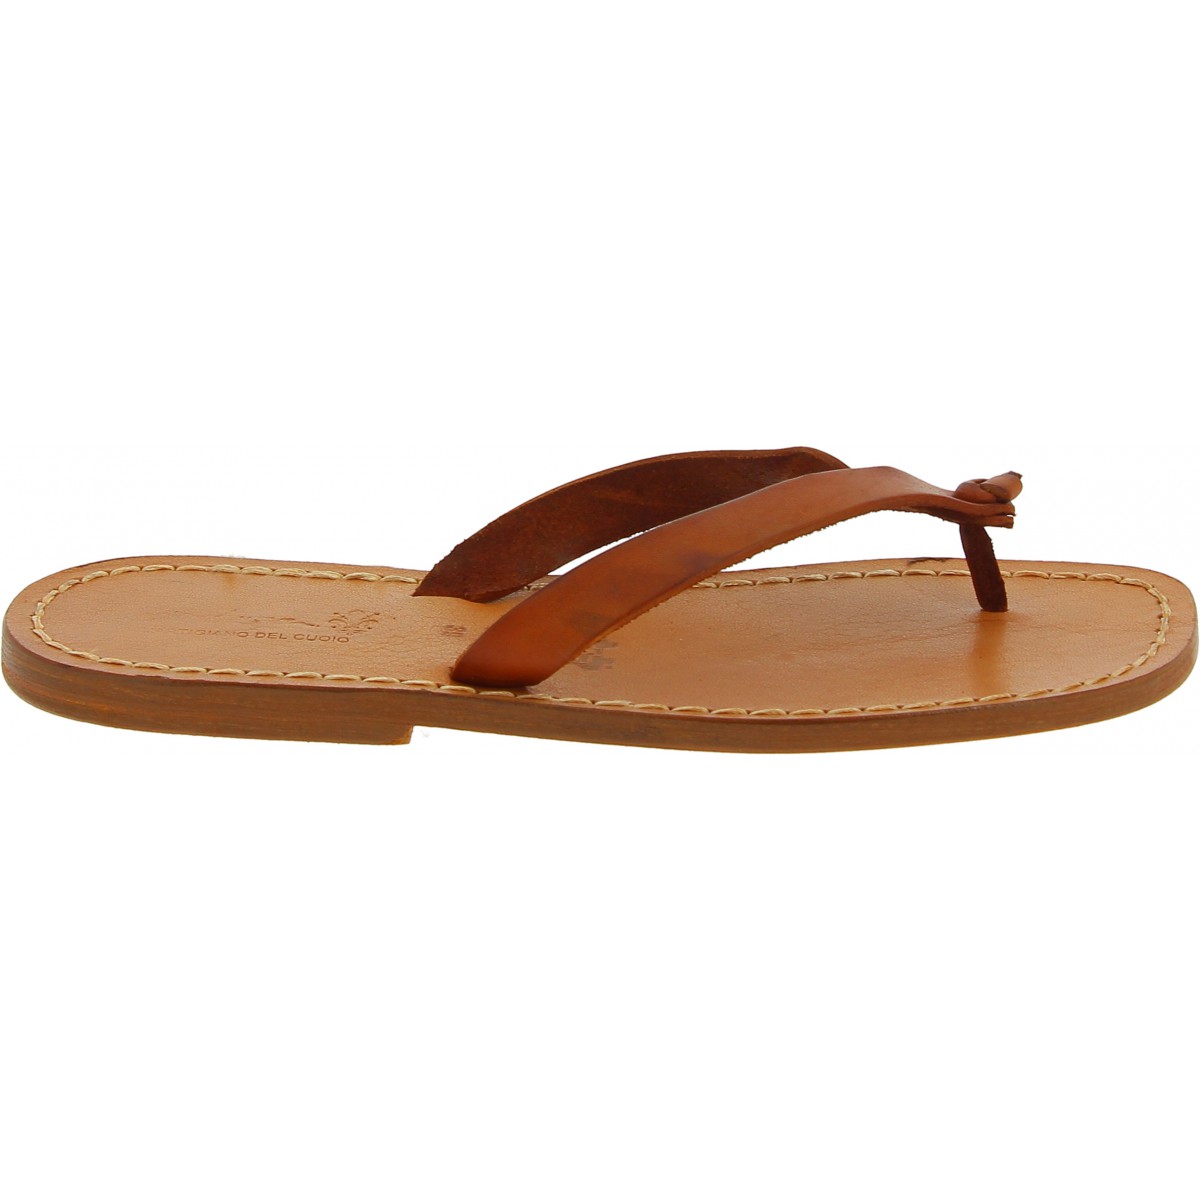 Tan leather thongs sandals for men Handmade | The leather craftsmen